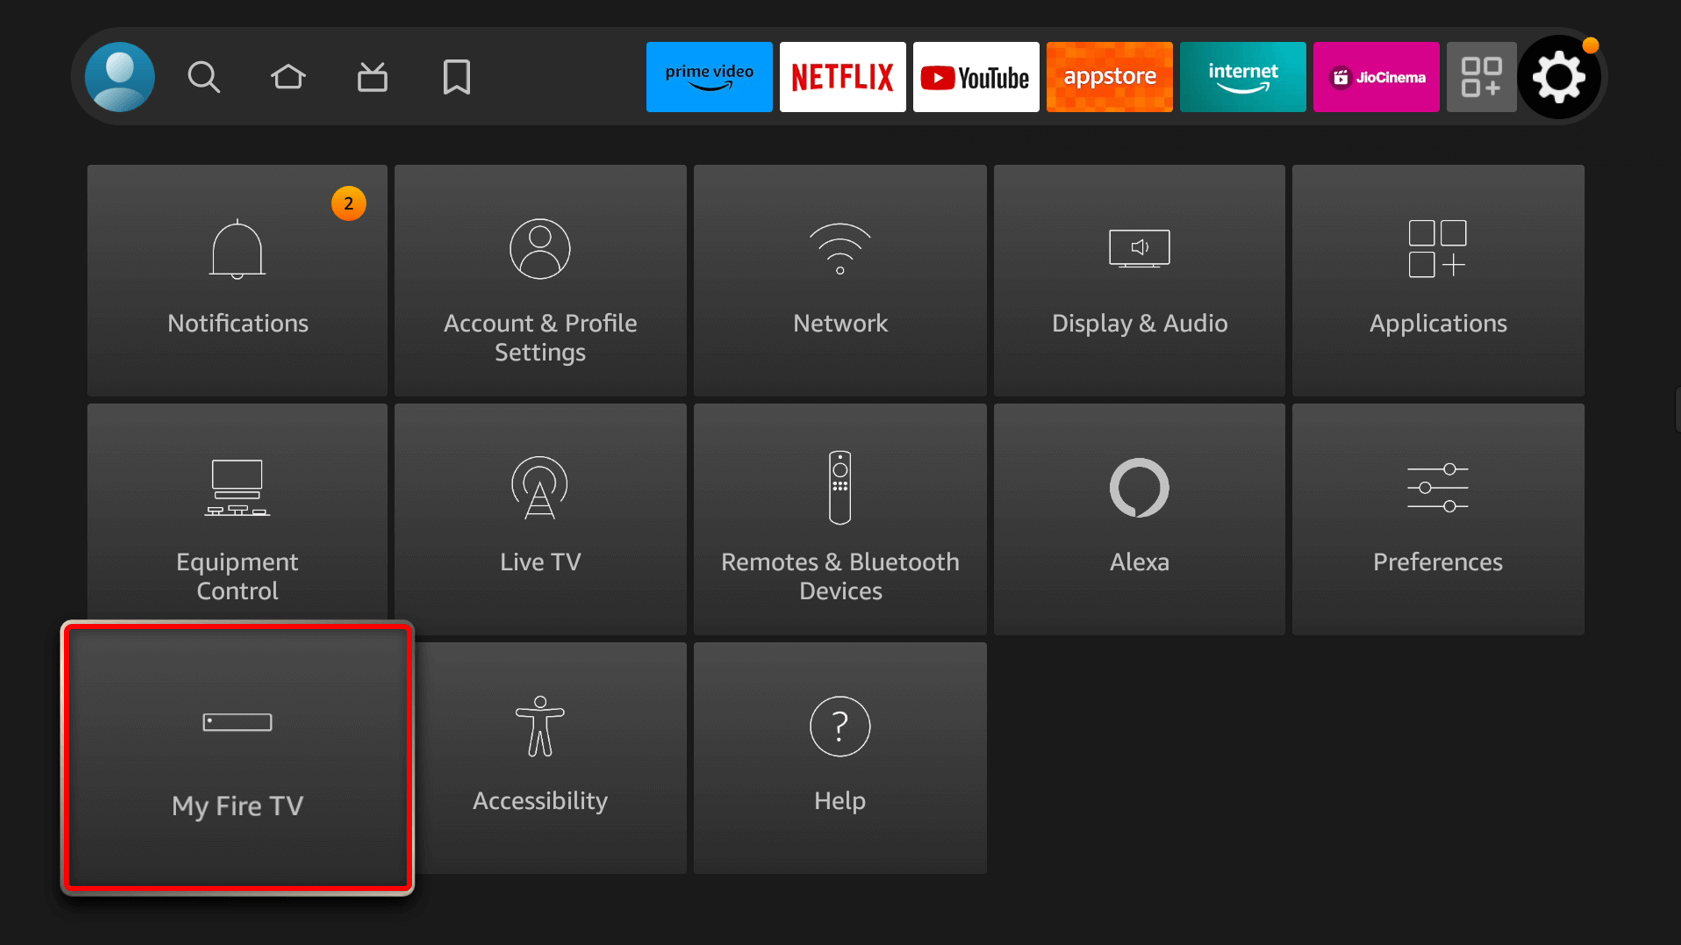 "My Fire TV" highlighted in Fire TV Settings.